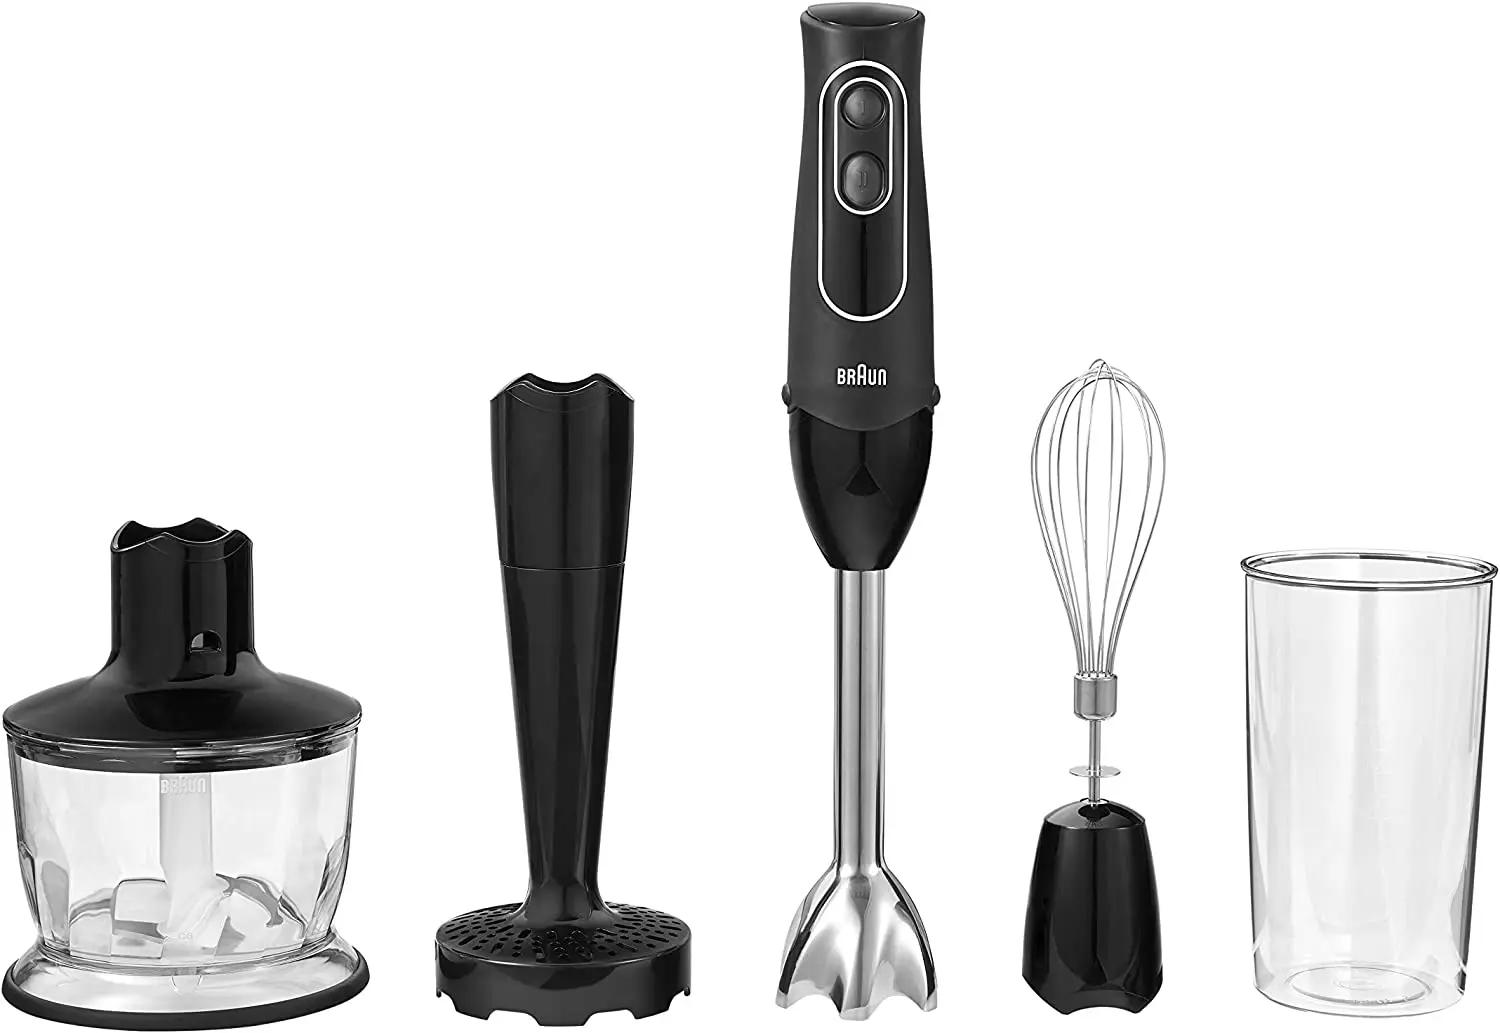 

4-in-1 Immersion Hand Blender, Powerful 350W Stainless Steel Stick Blender, Multi-Speed + 2-Cup Food Processor, Whisk, Beaker, M